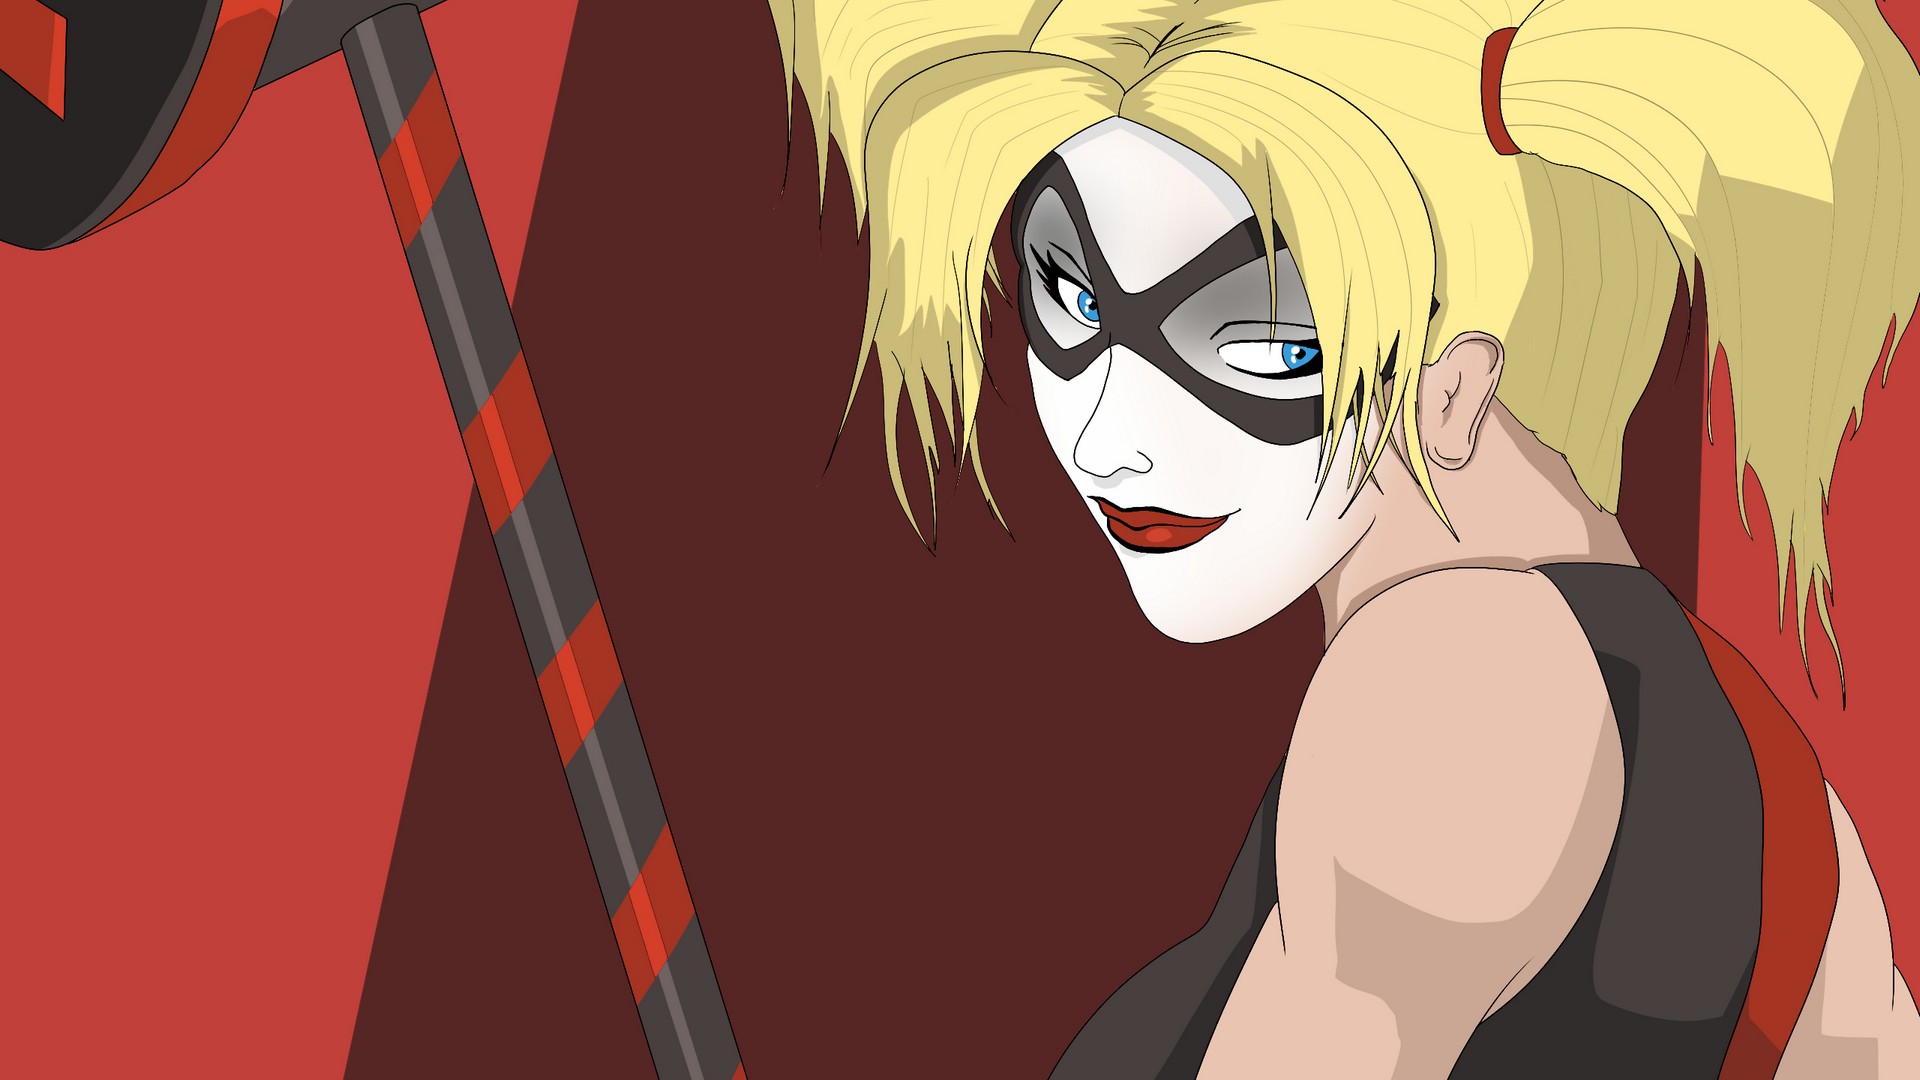 Harley Quinn Shirt Desktop Wallpaper with image resolution 1920x1080 pixel. You can use this wallpaper as background for your desktop Computer Screensavers, Android or iPhone smartphones